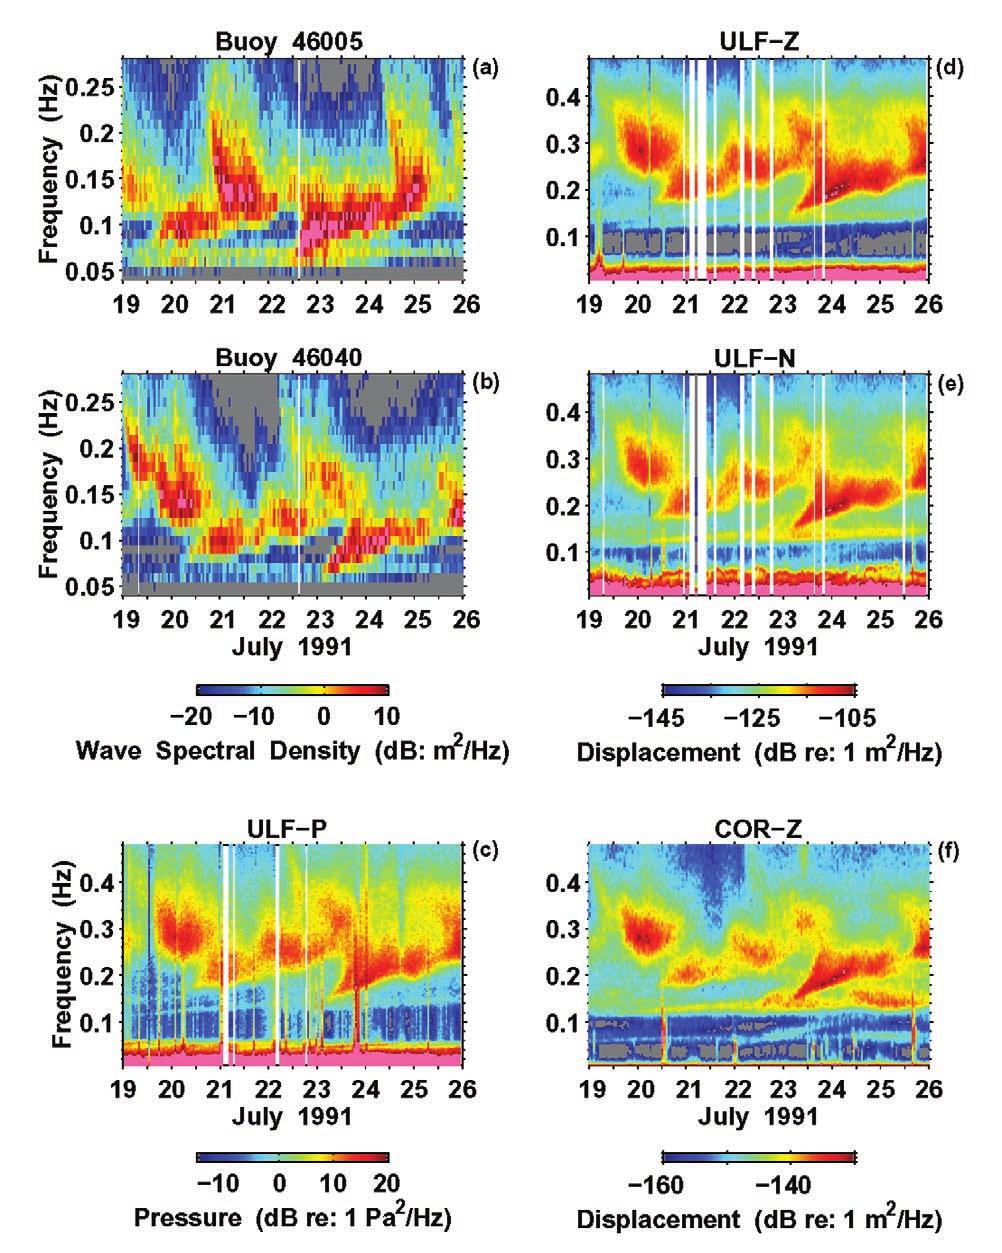 ESE 5-6 BROMIRSKI AND DUENNEBIER: NEAR-COASTAL MICROSEISM SPECTRUM Figure 6. Wave spectral variation during the July 1991 ULF/VLF experiment at (a) offshore buoy 465 and (b) nearshore buoy 464.